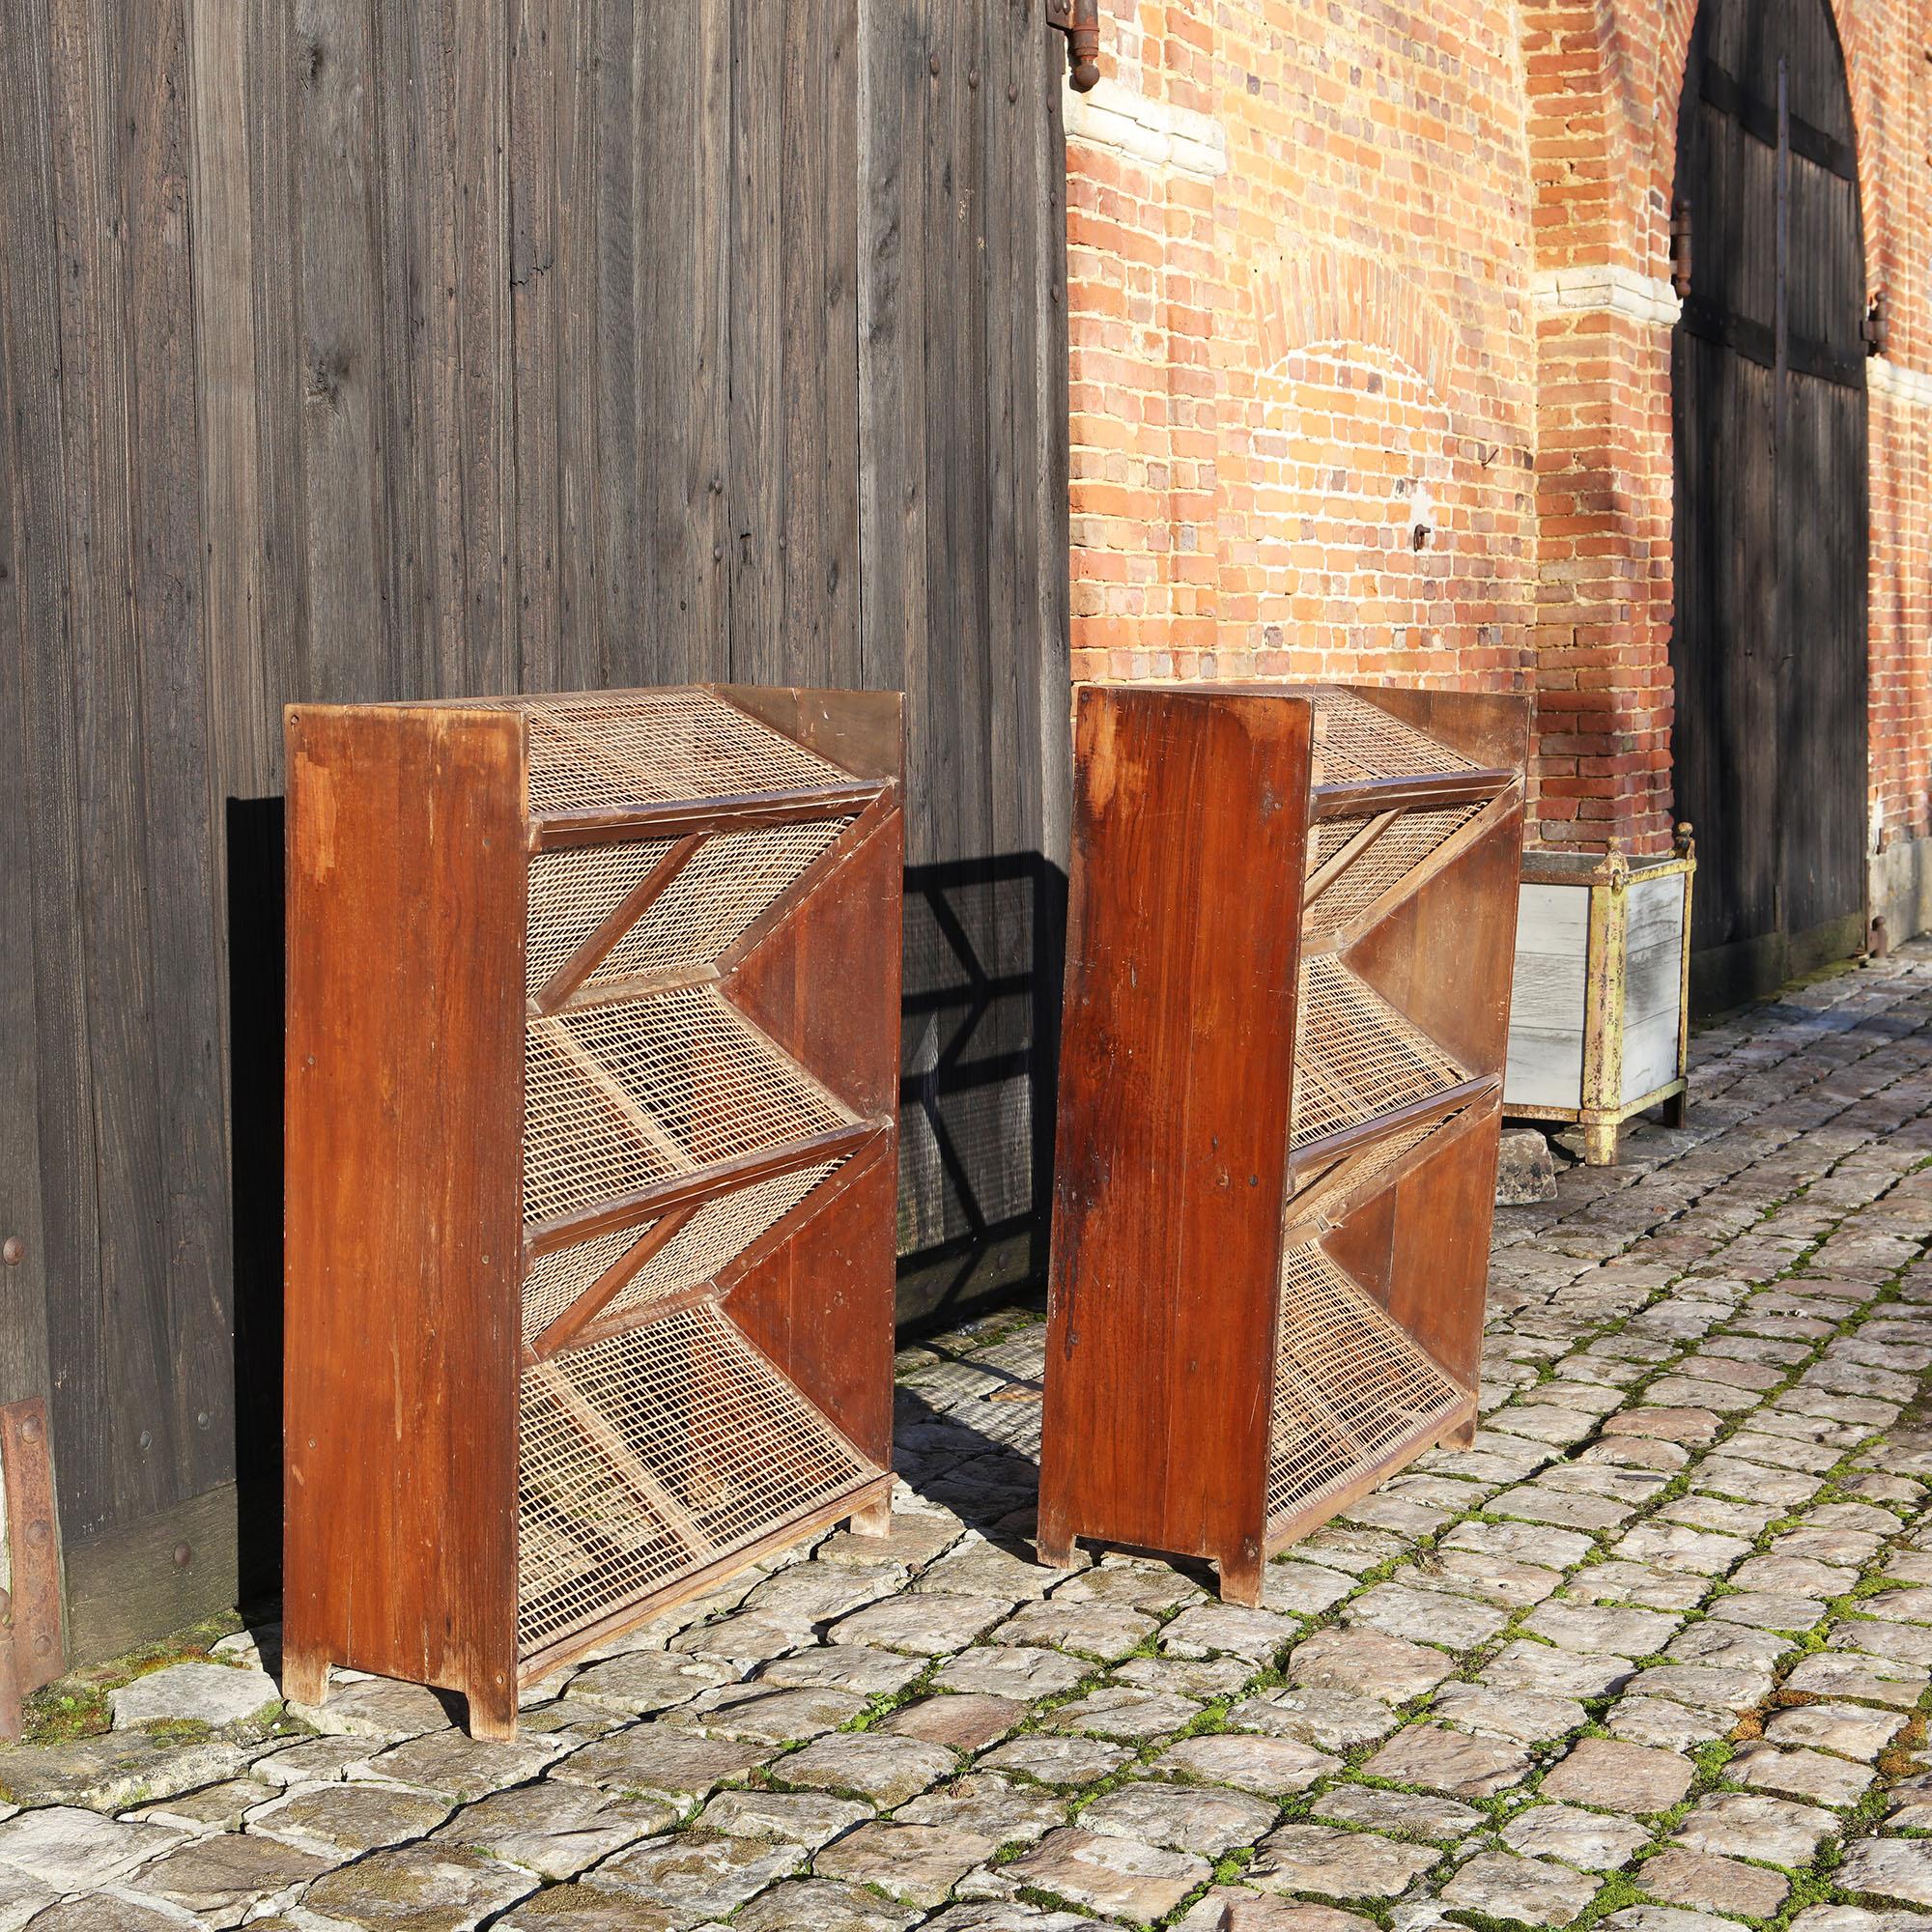 Pair of teak and cane magazine racks by Pierre Jeanneret for Chandigarh, India, 1950s

Measures: Height 112cm
Width 92cm
Depth 30cm.